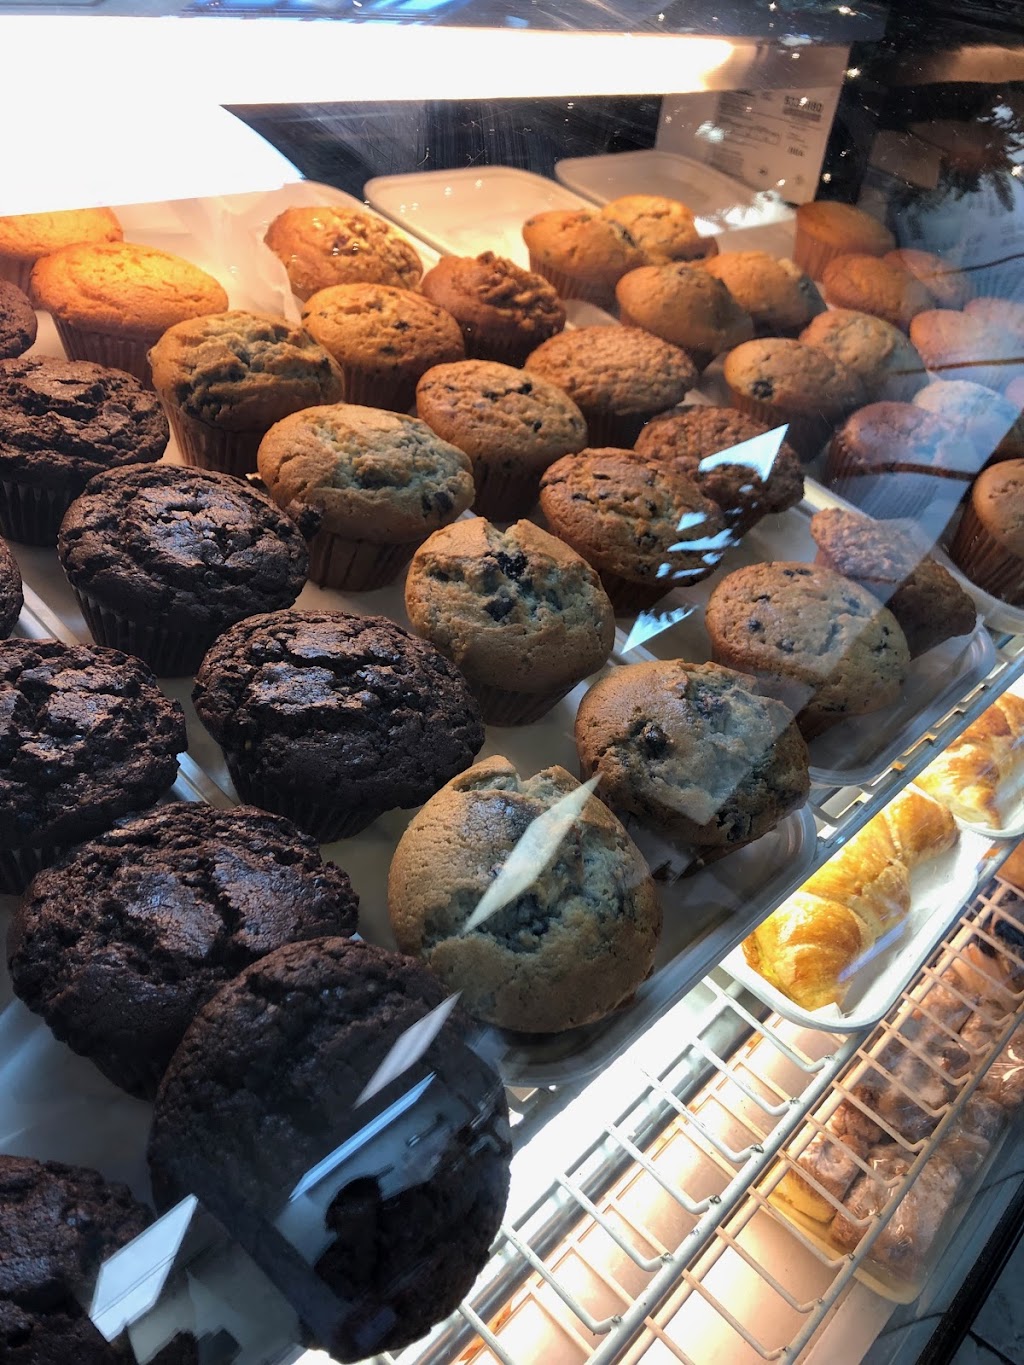 Zimi Bagel Cafe and Deli | 38 N Middletown Rd, Pearl River, NY 10965 | Phone: (845) 735-8000